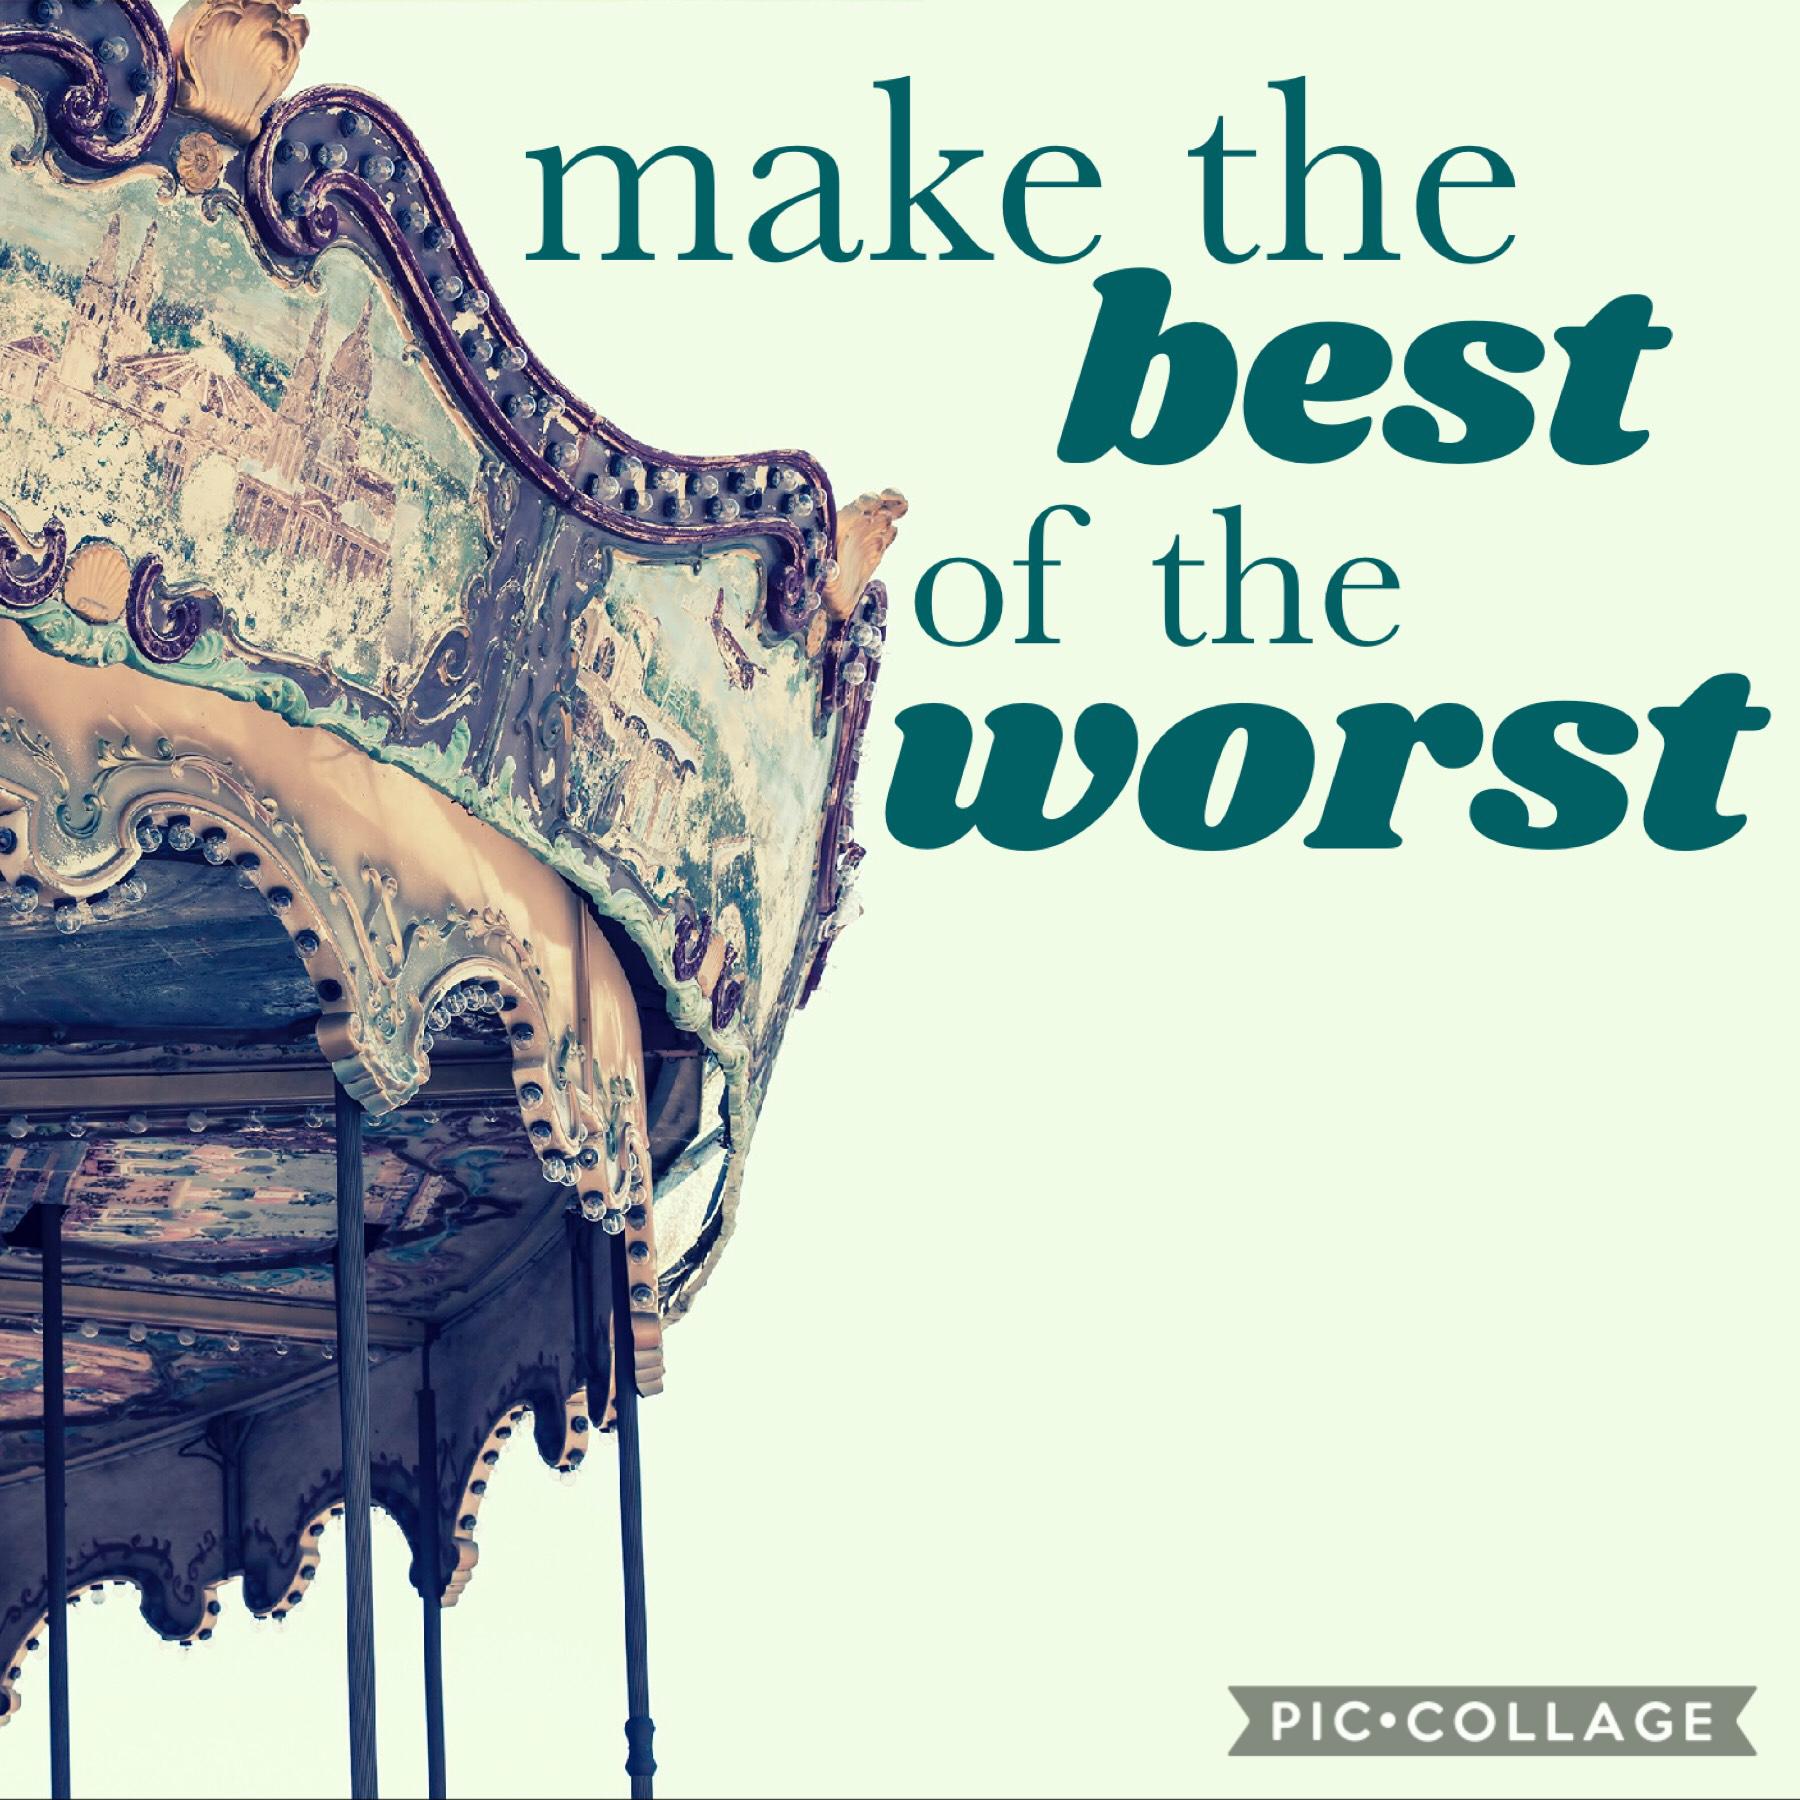 make the best of the worst and there will be nothing worse
feeling kinda melancholic today because we got new class assignments... and i’m separated from most of the people i wanted in my class the most and who i was closest with. continued in comments.